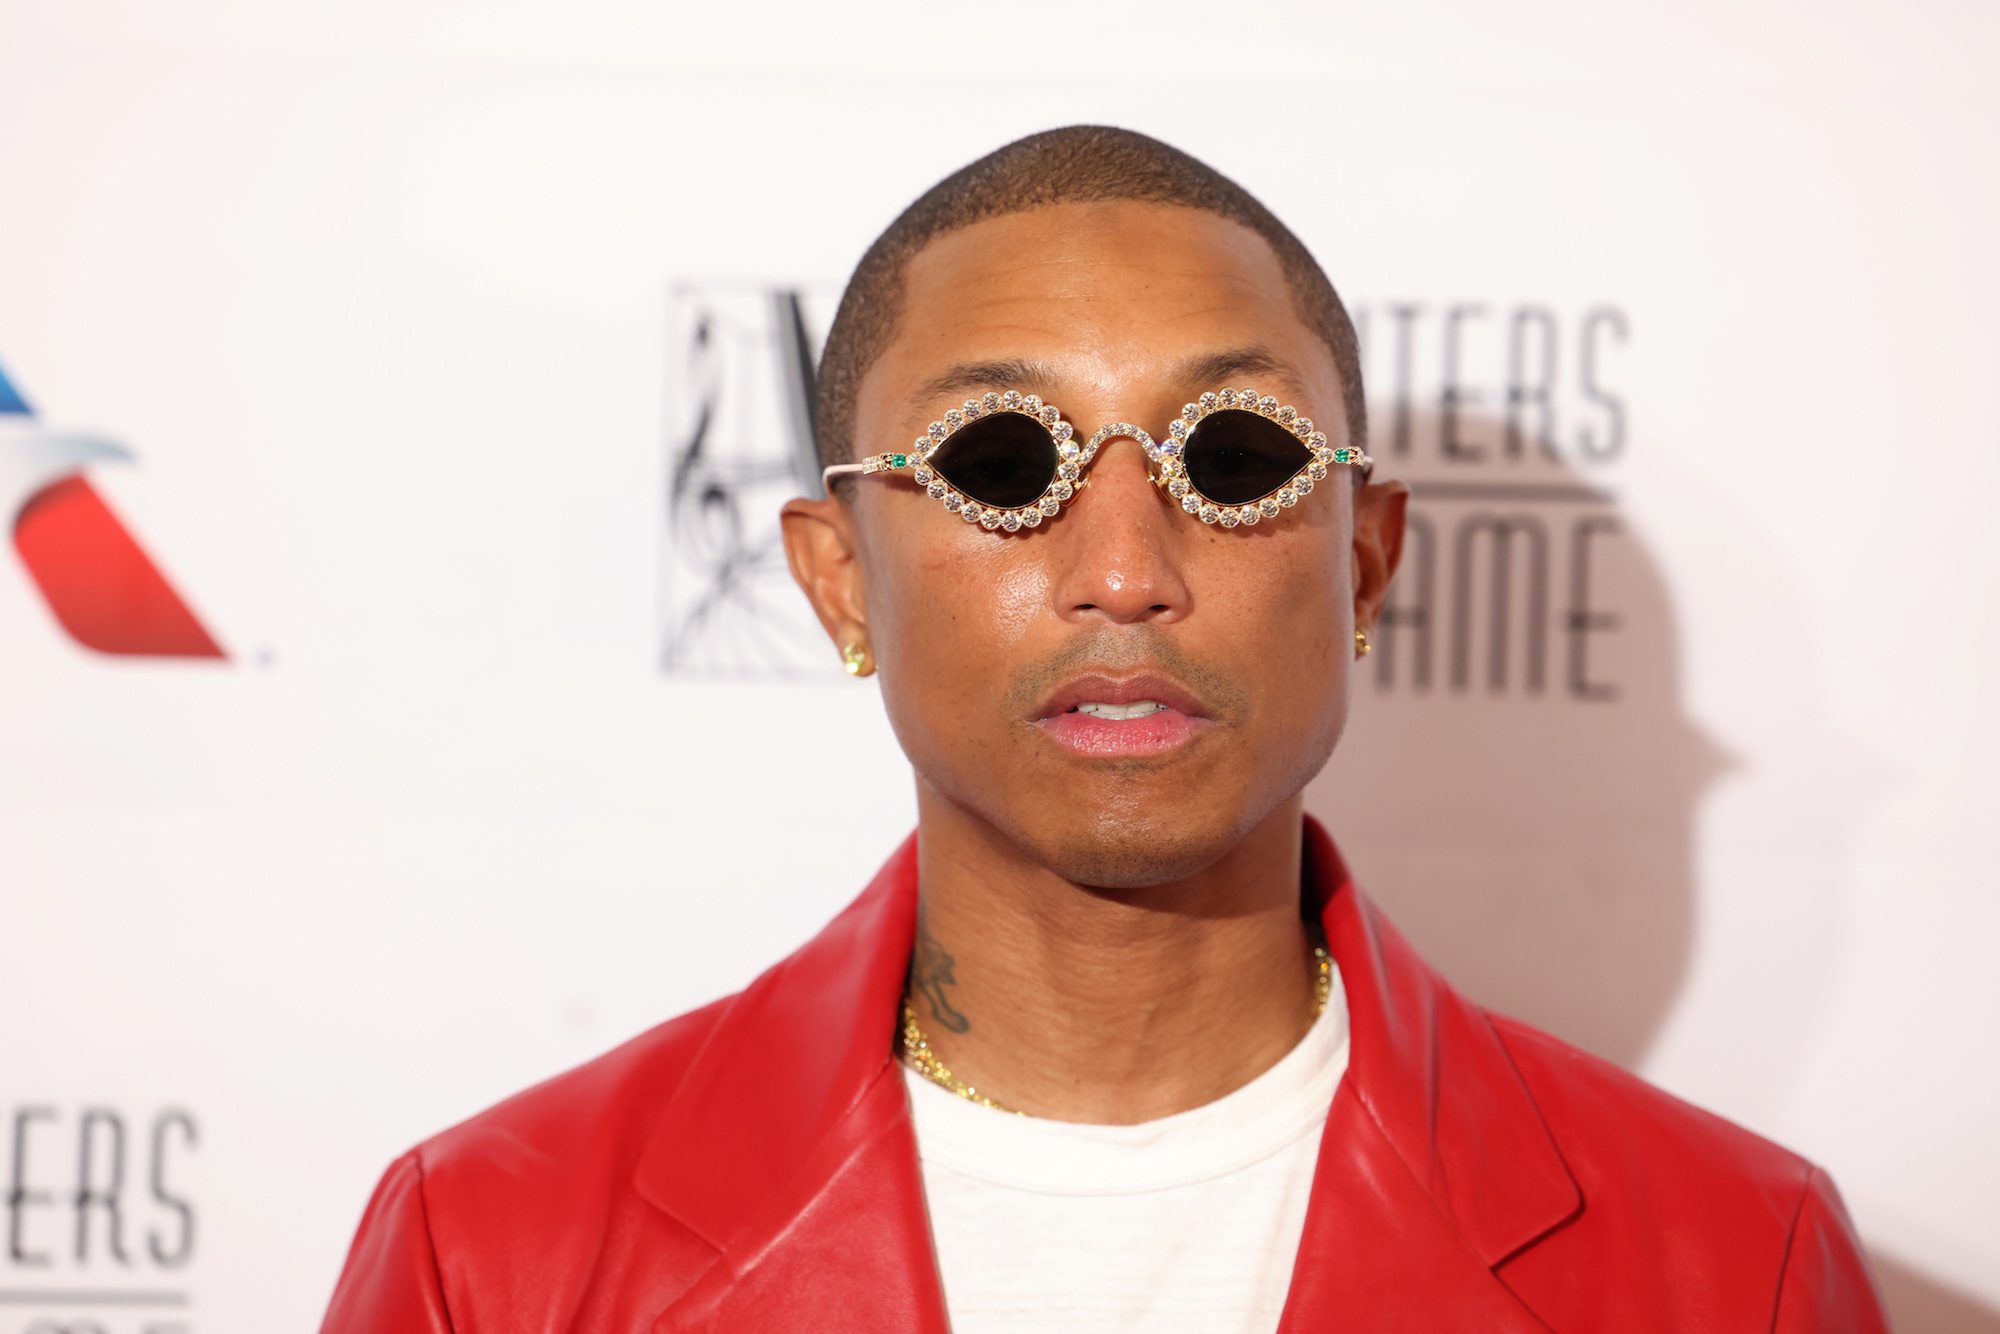 Pharrell Williams attends the Songwriters Hall of Fame 51st Annual Induction and Awards Gala in New York New York, U.S., June 16, 2022.  REUTERS/Caitlin Ochs